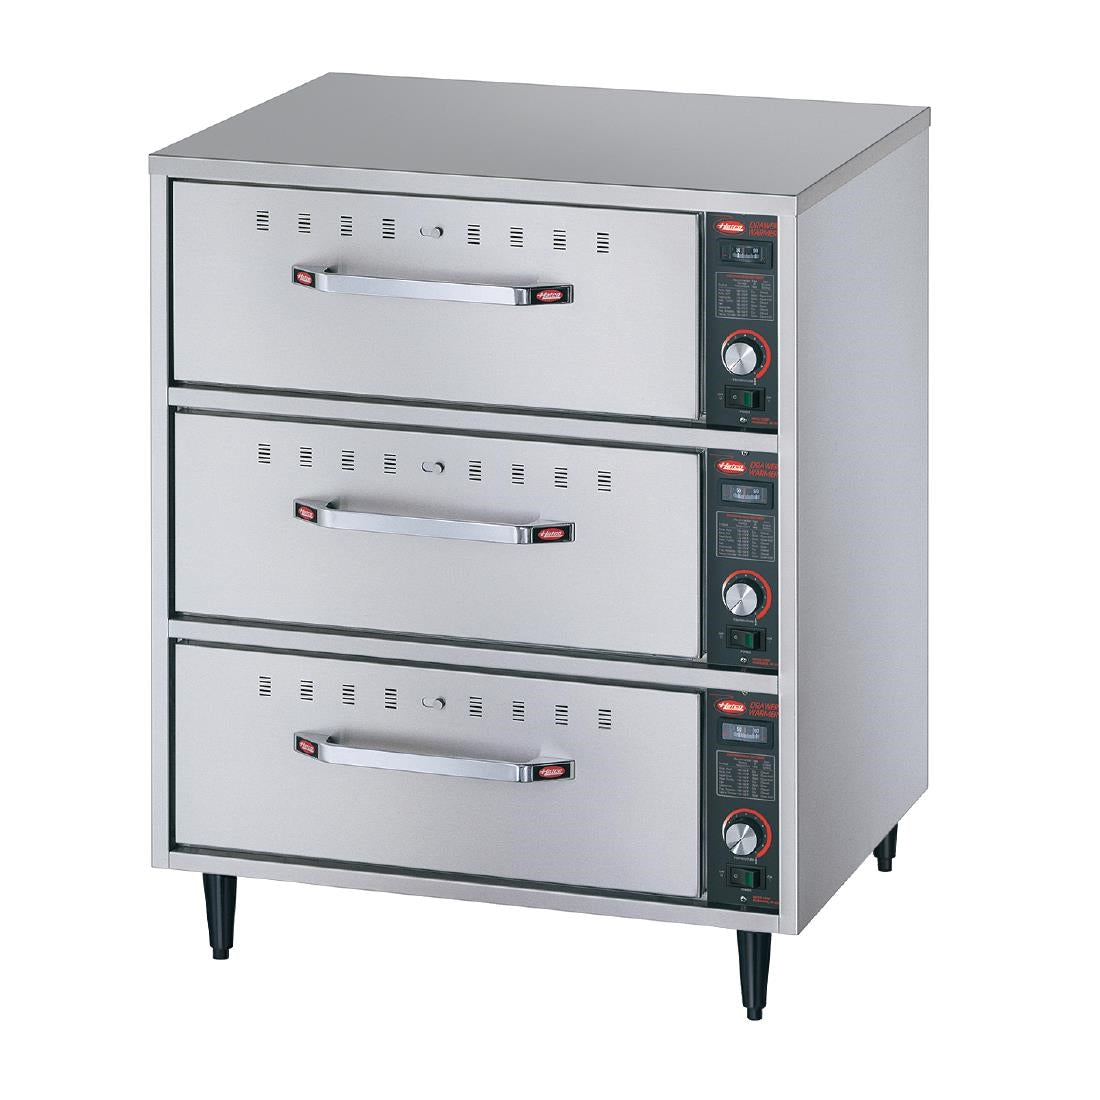 Hatco Warming Drawers HDW-3 JD Catering Equipment Solutions Ltd